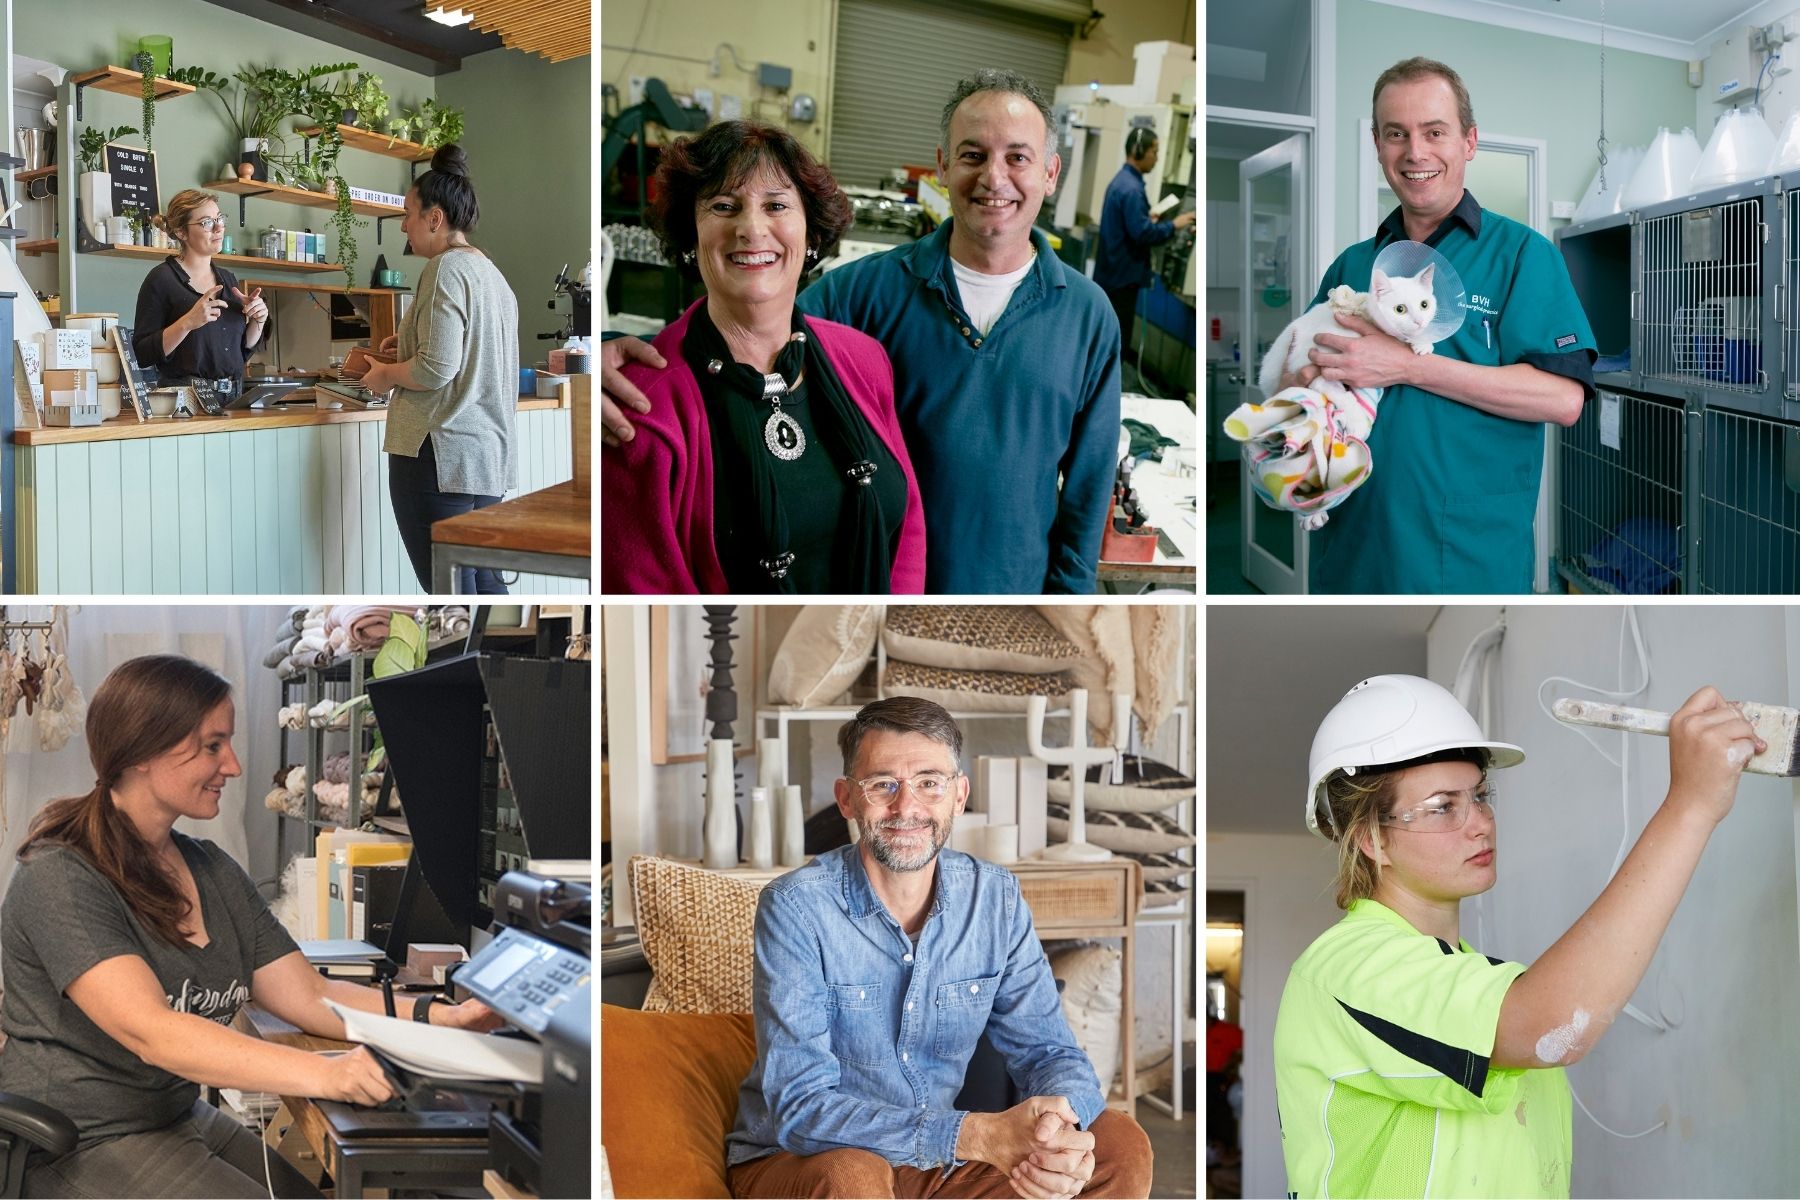 A photo montage showing a range of different business owners including a cafe, factory, vet, photographer, retail store owner and house painter.